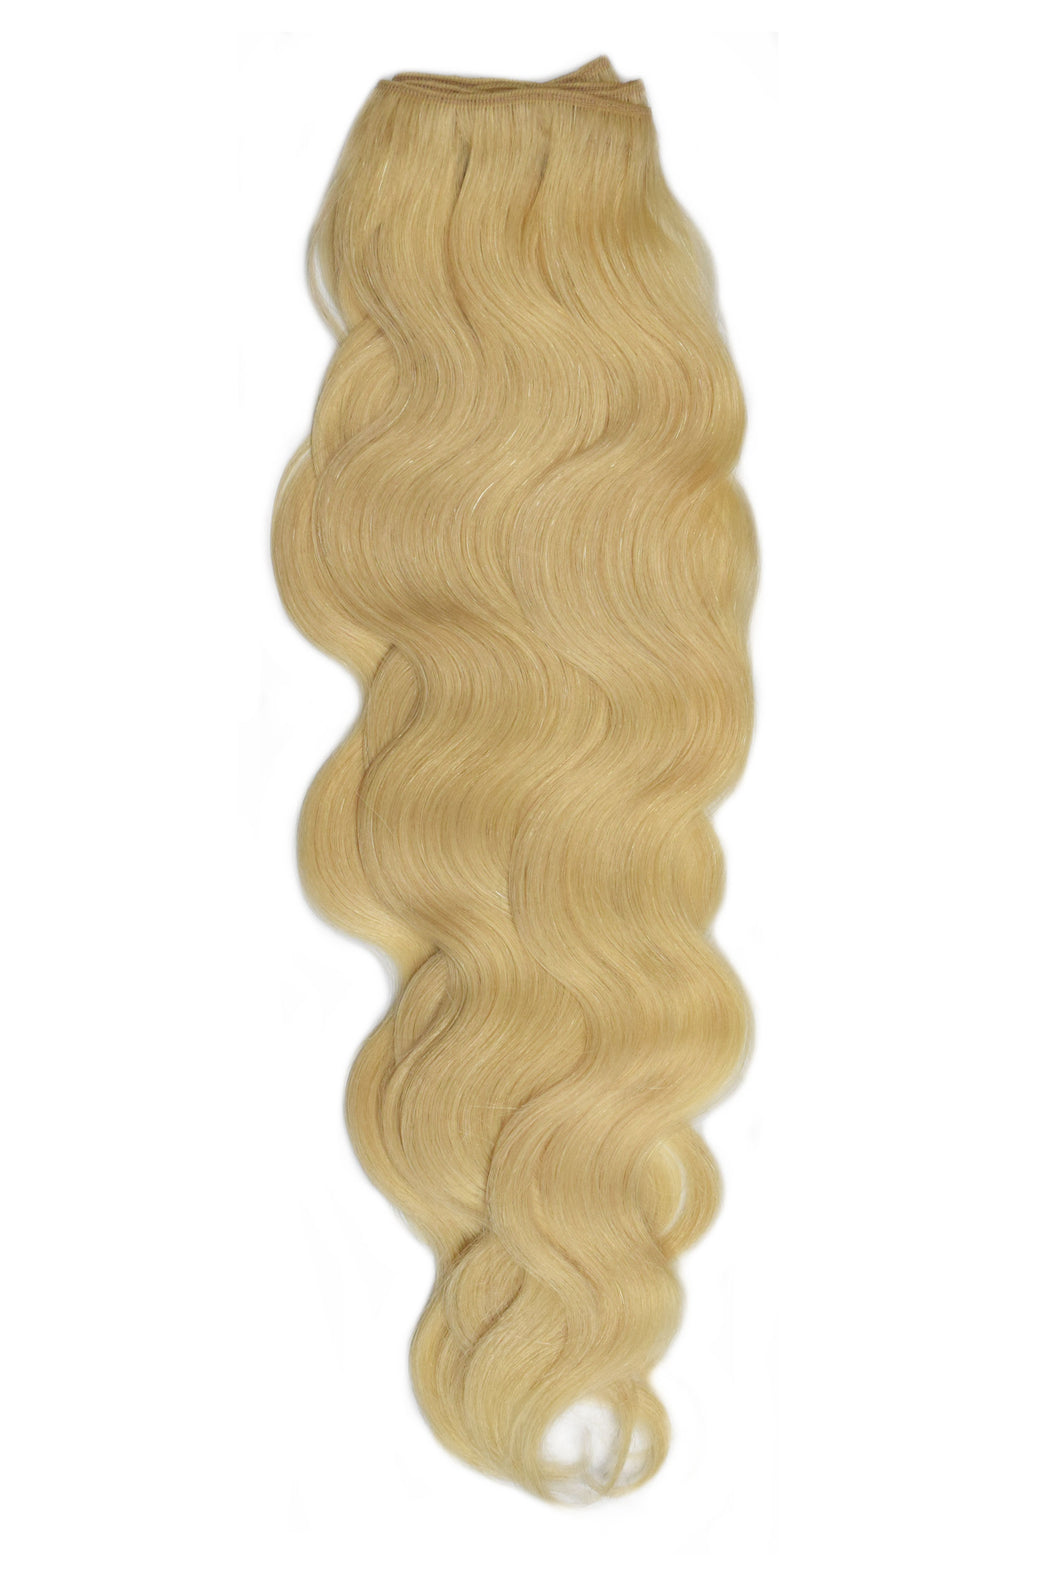 485NW Super Remy Natural Wave 22